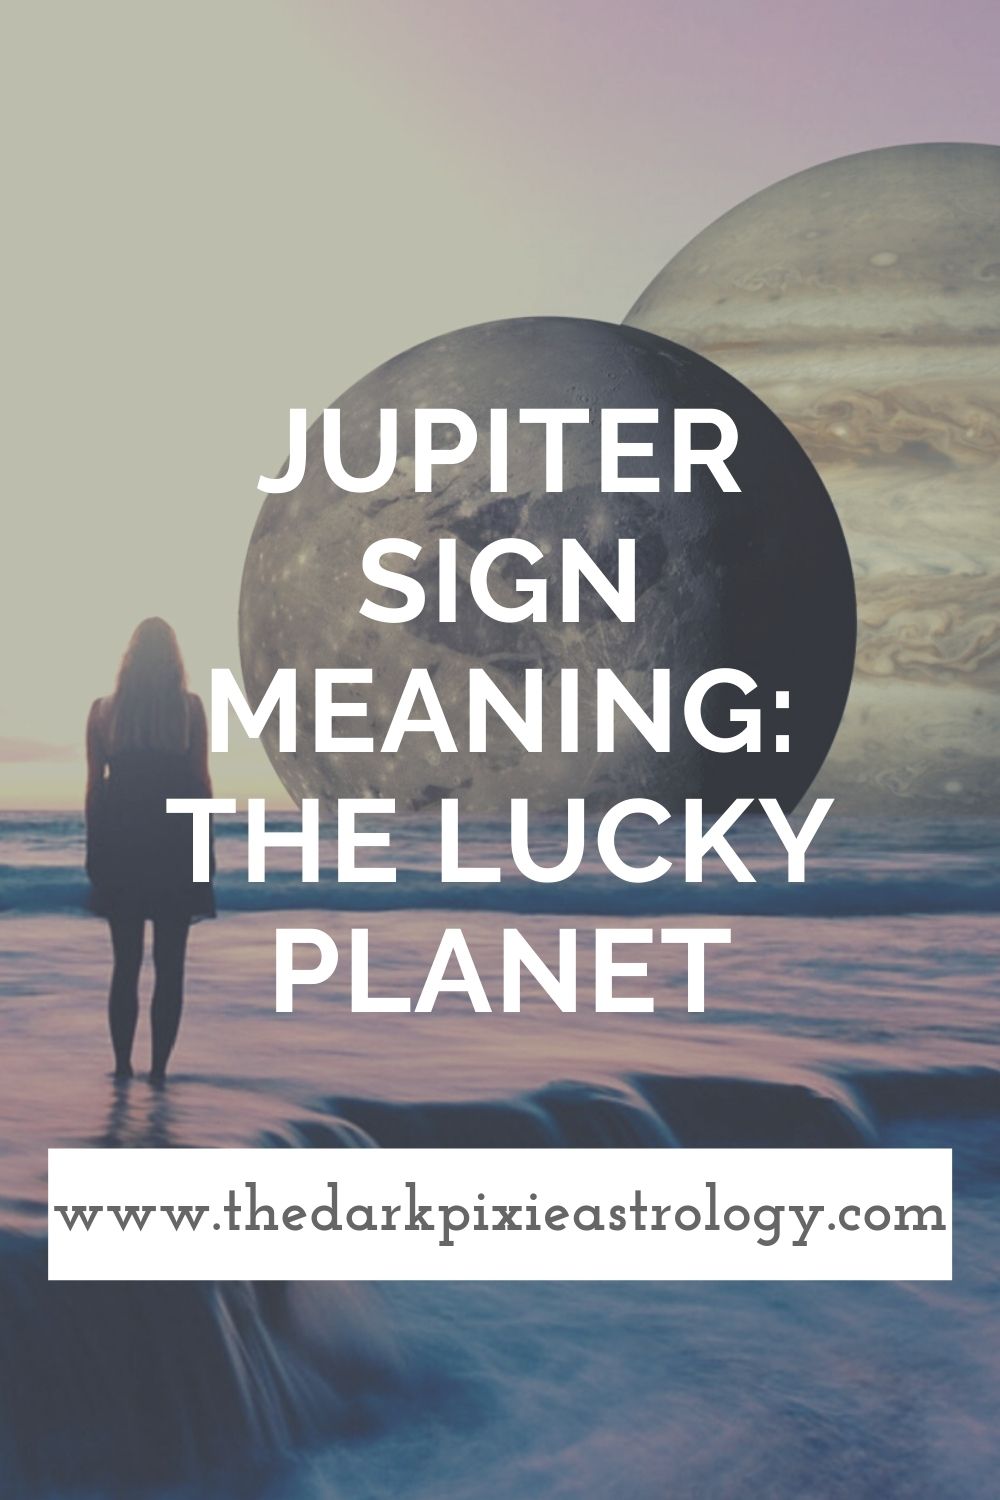 Jupiter Sign Meaning: The Lucky Planet - The Dark Pixie Astrology